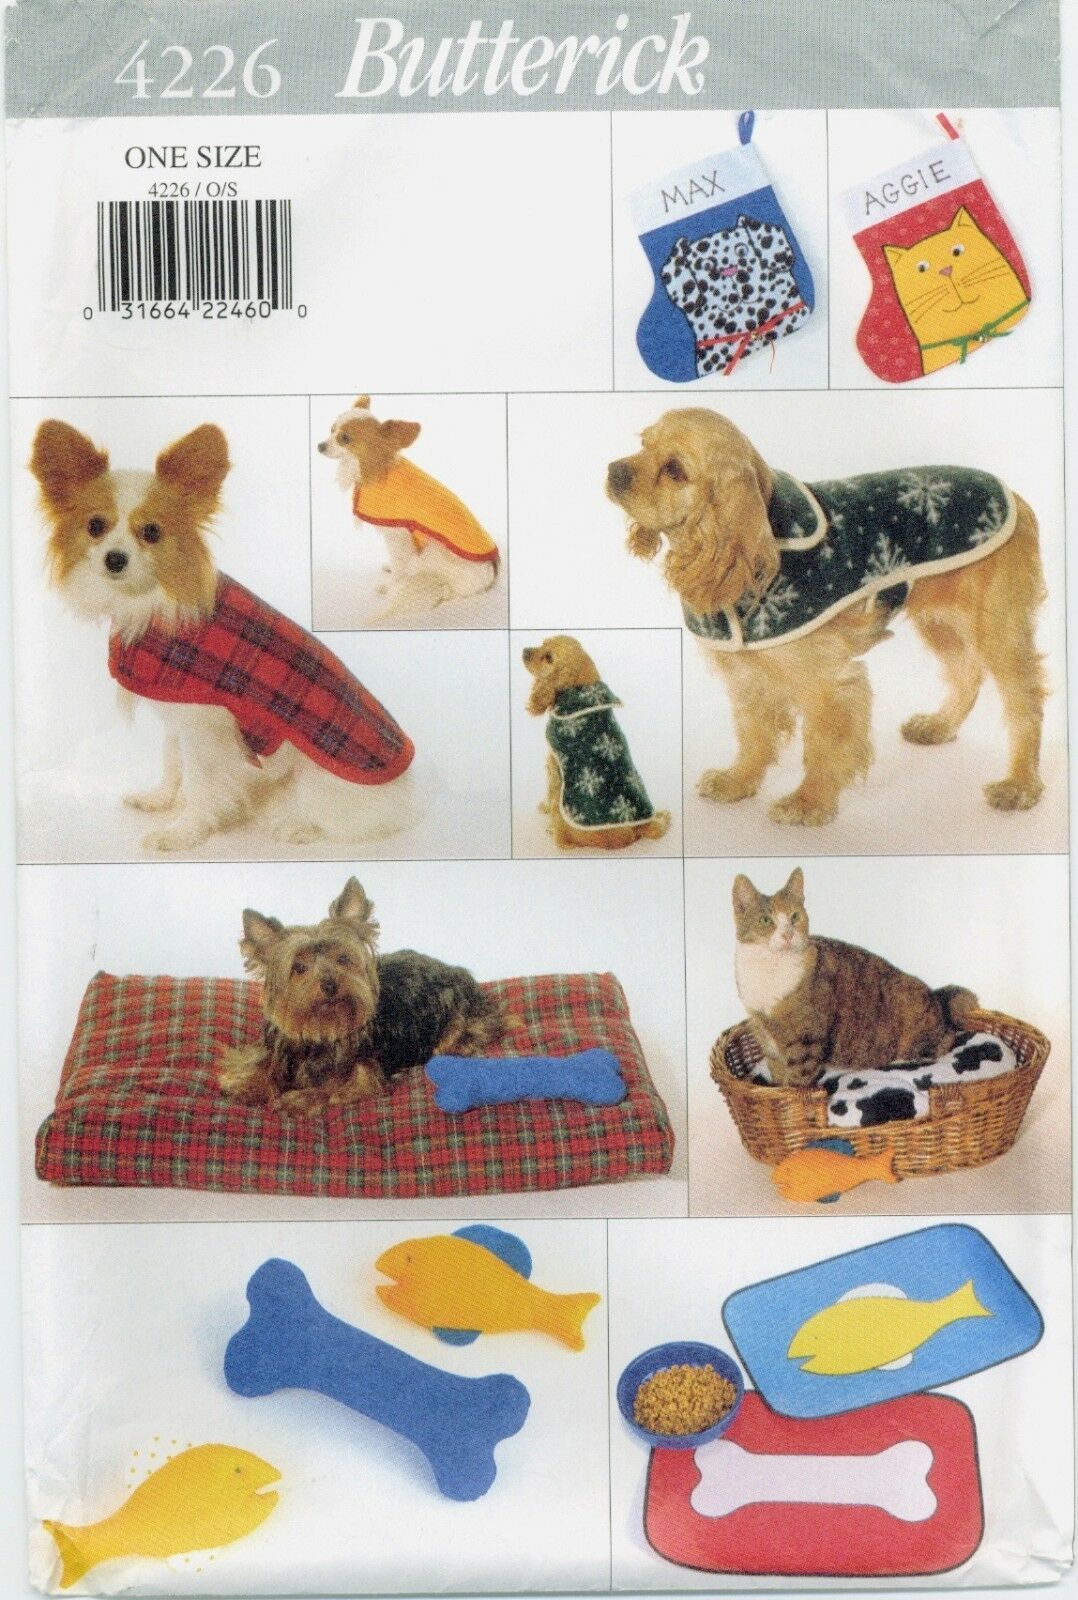 Butterick 4226 377 DOG CAT PET COATS Stocking Bed Placemat Toy pattern UNCUT FF - $9.40